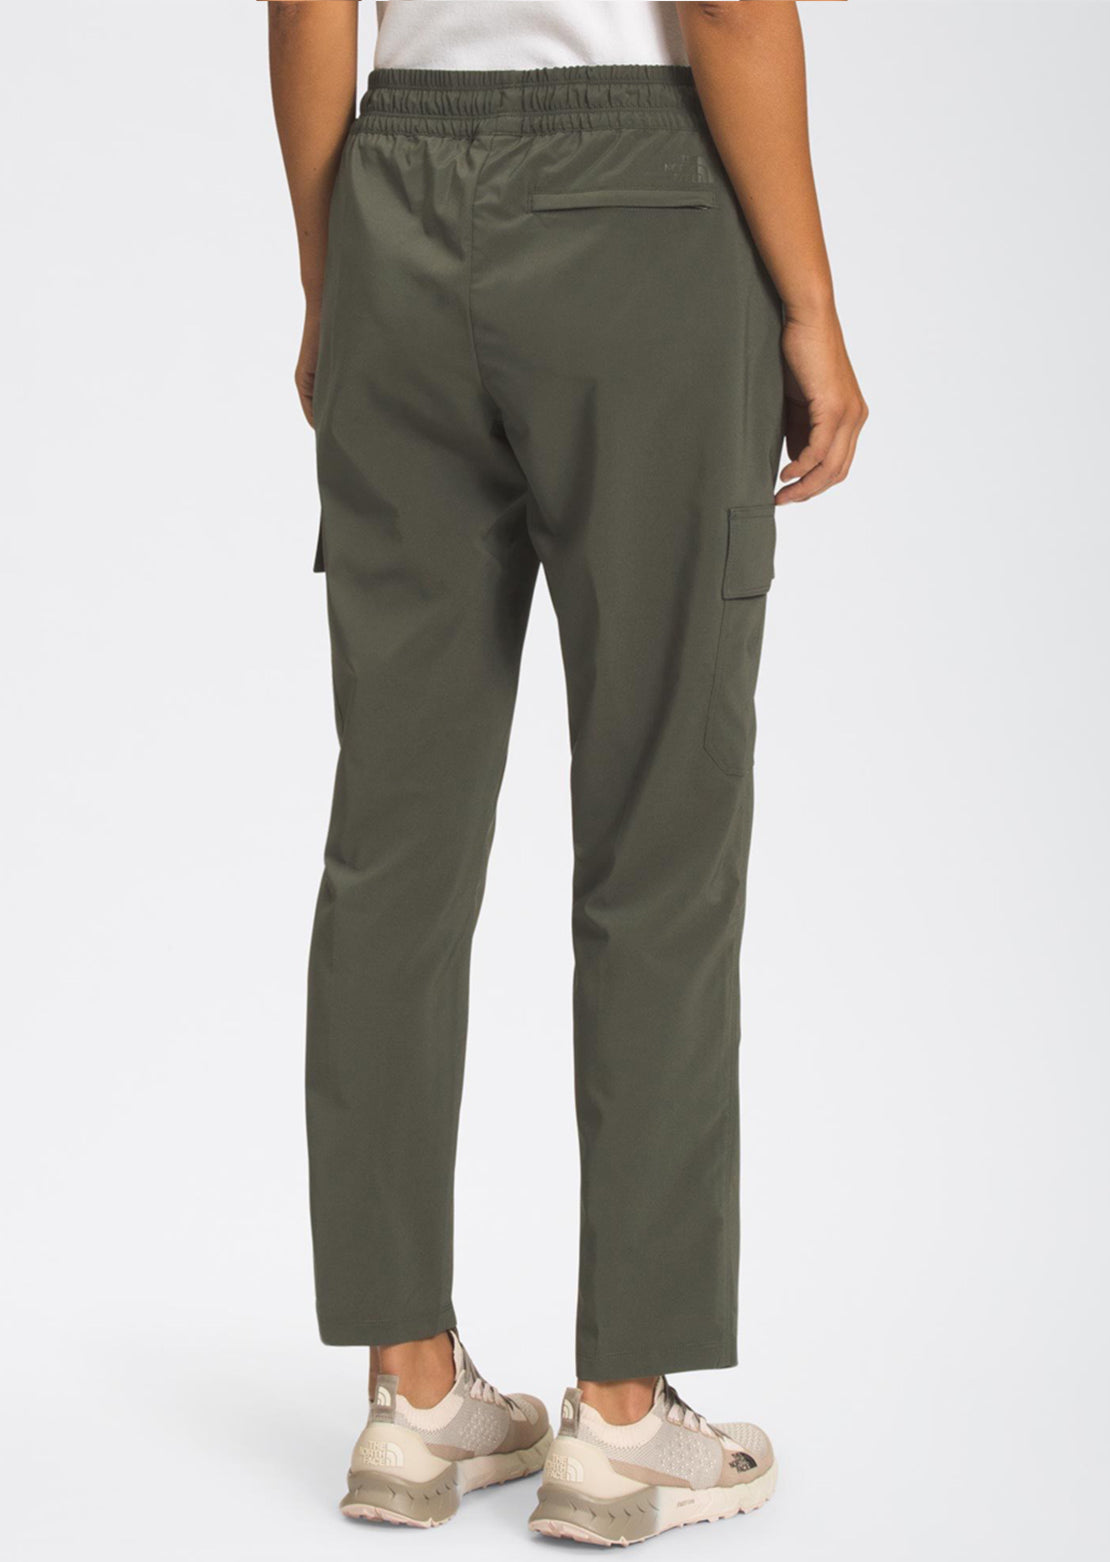 The North Face Women's Never Stop Wearing Cargo Pants - PRFO Sports